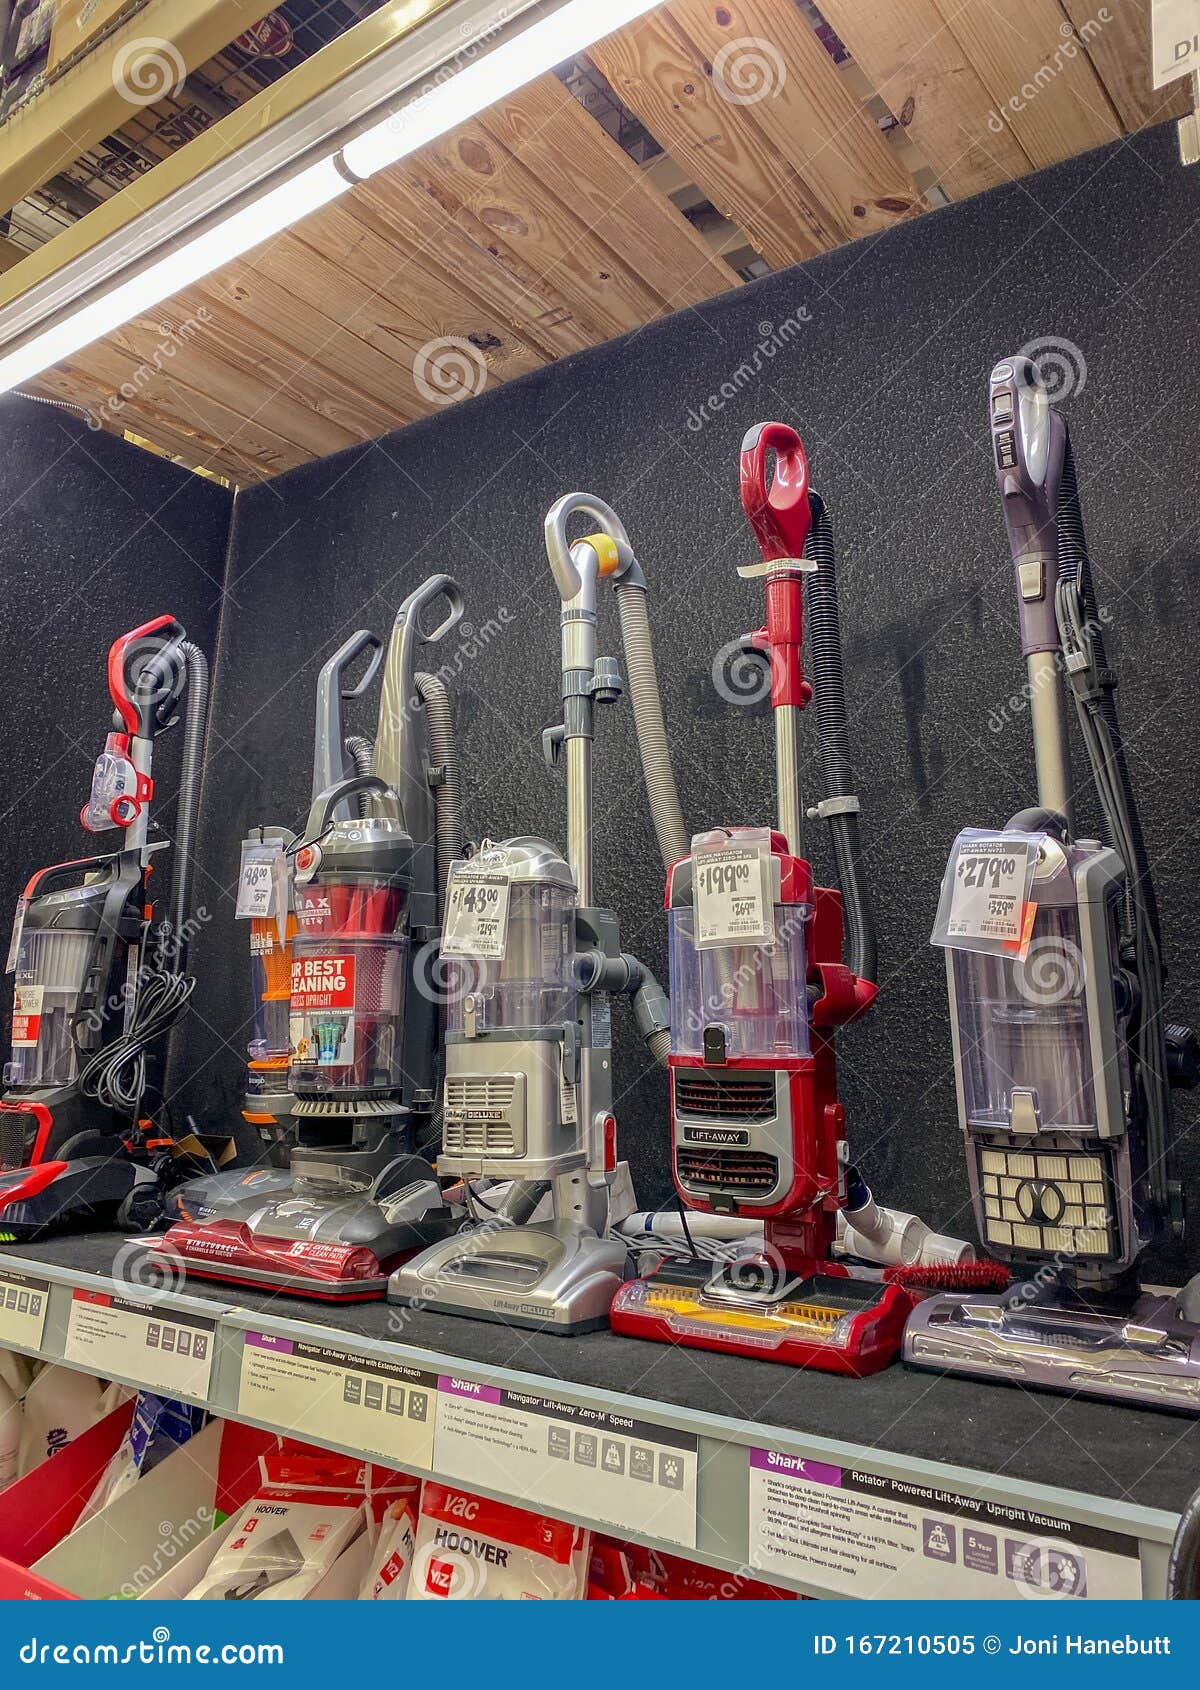 A Display Shelf Of Vacuums For Sale At A Home Depot Store